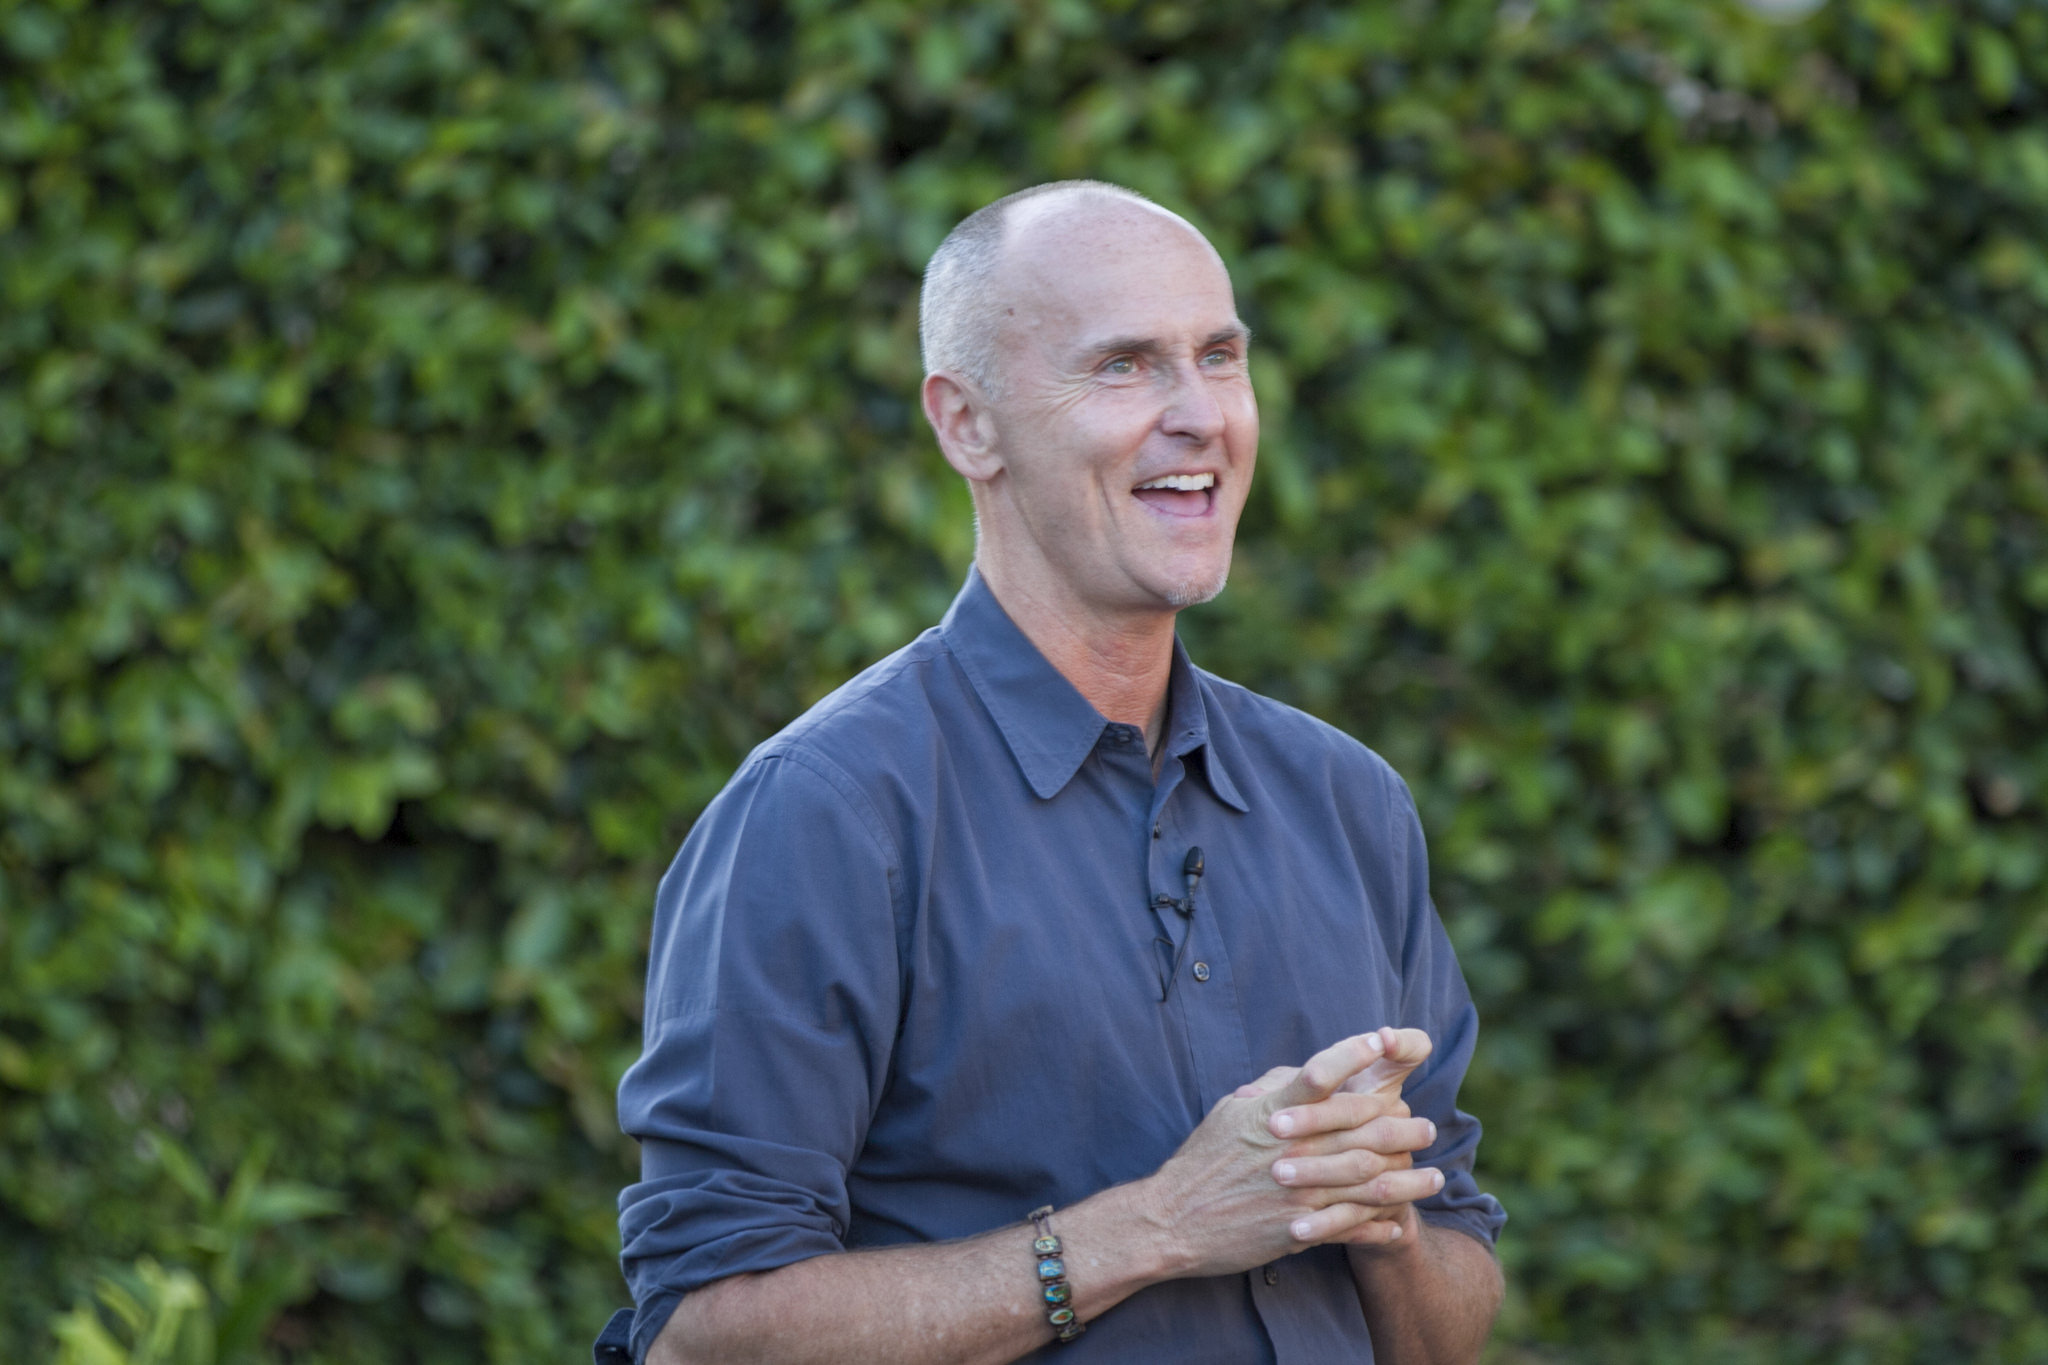 Airbnb's Chip Conley gives Candid Talk at Senior Living Innovation Forum